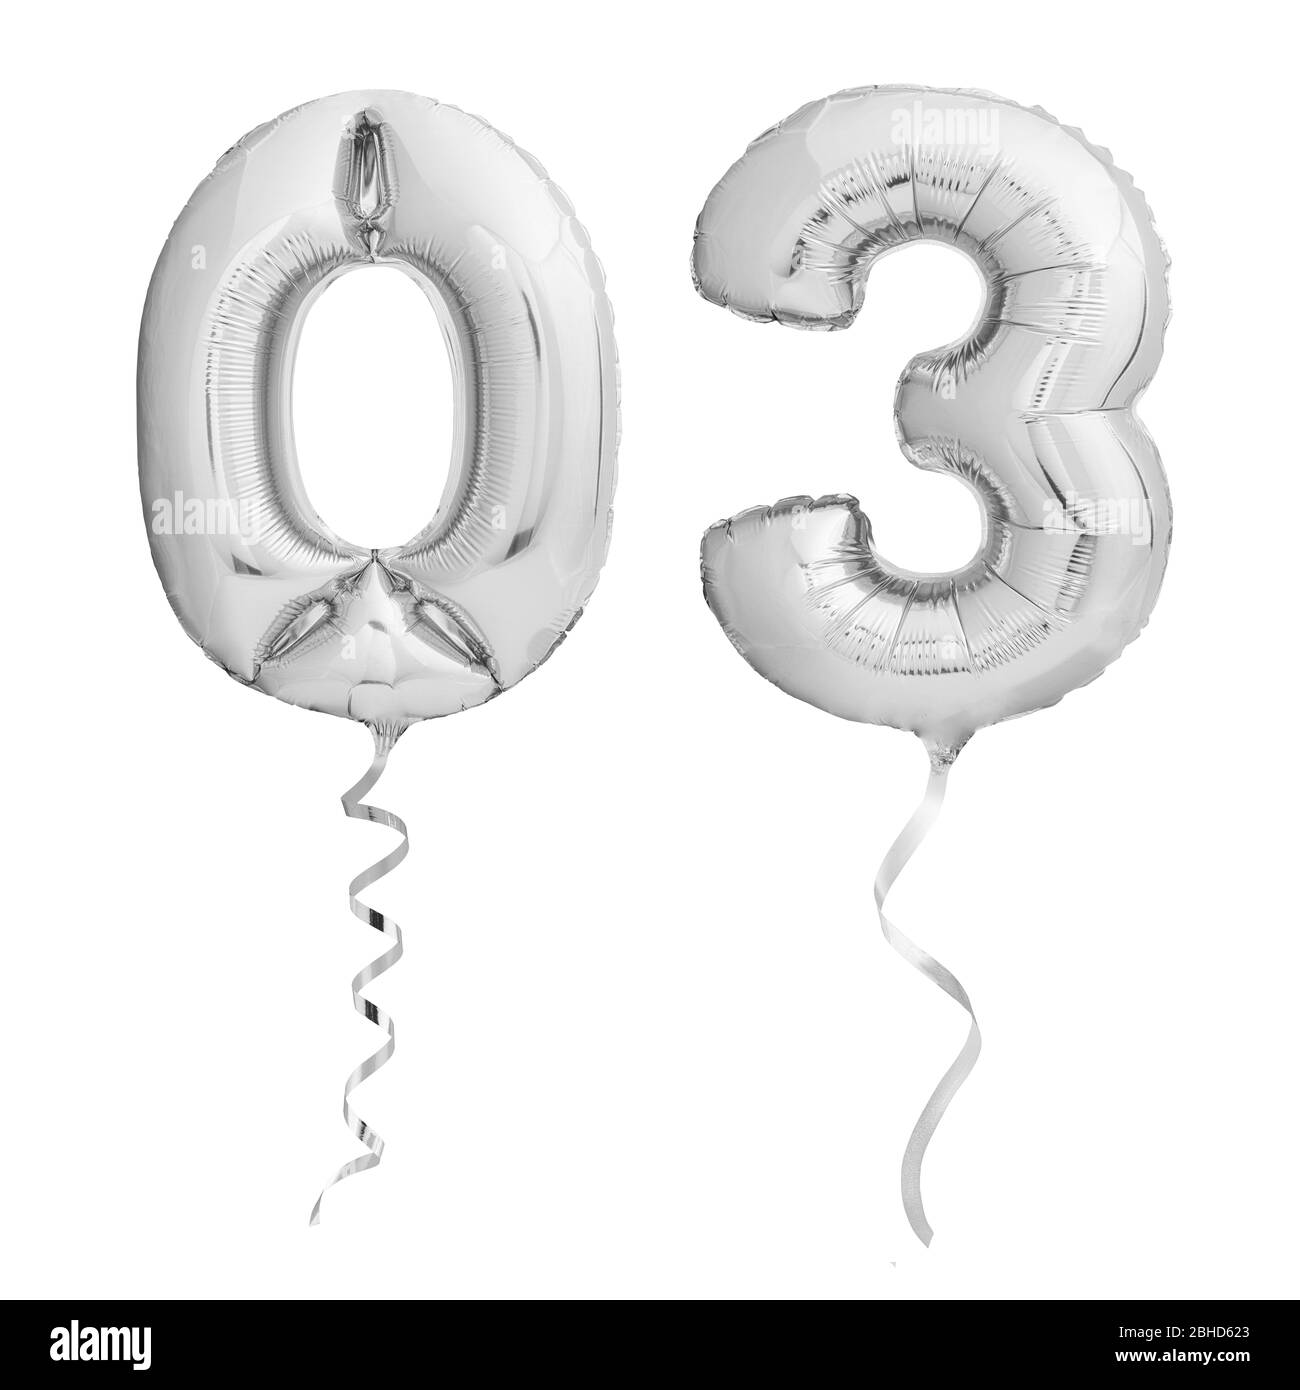 Silver number 03 made of inflatable party balloons with silver ribbons isolated on white background Stock Photo